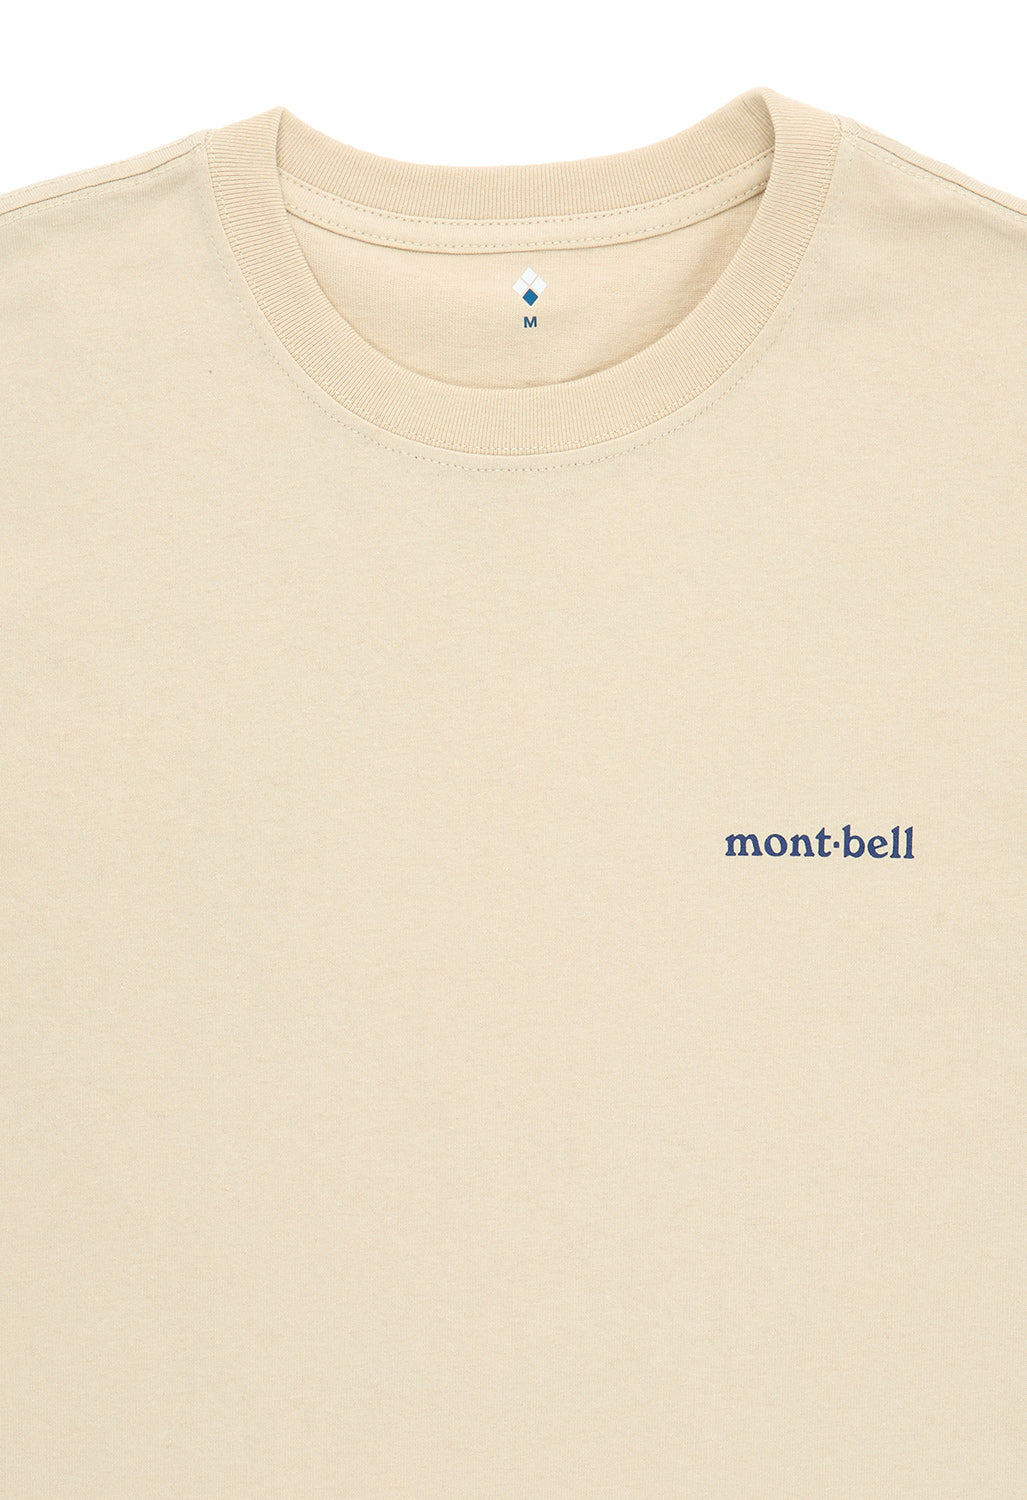 Montbell Pear Skin Cotton Dangai T-Shirt - Ivory